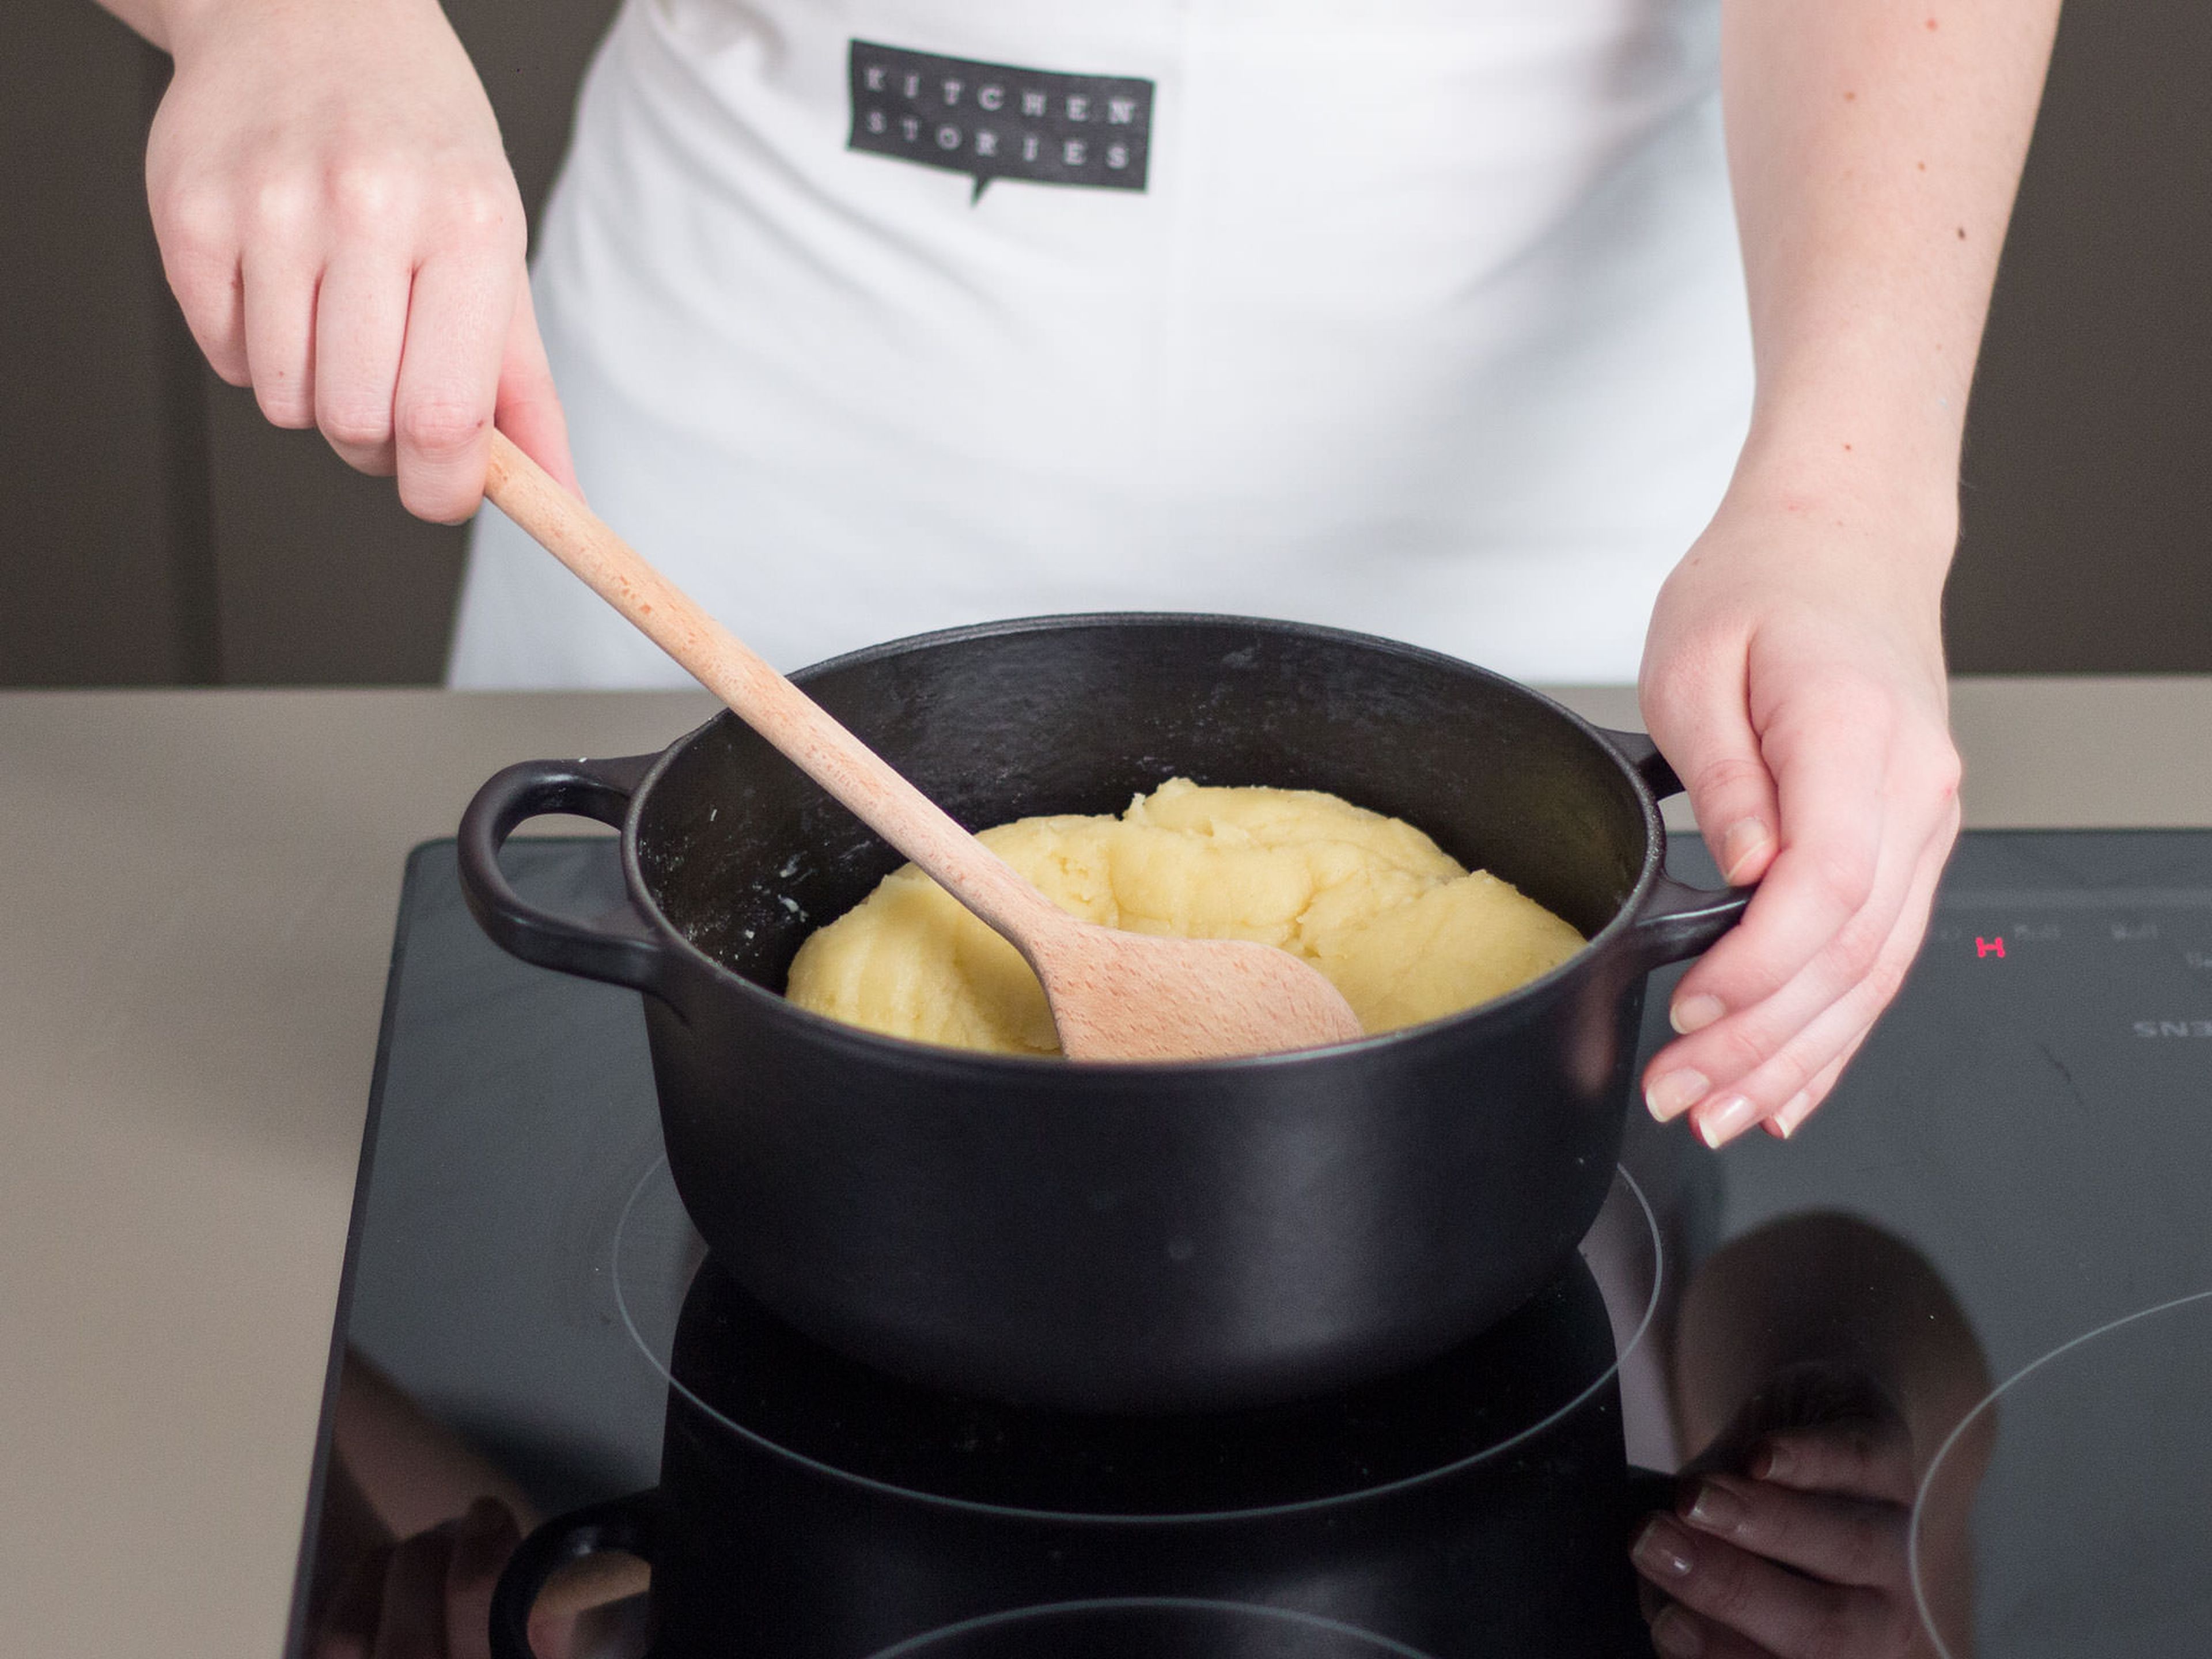 In a large saucepan, bring water, sugar, butter and salt to a boil. Then add flour, reduce heat to medium, and cook while stirring constantly until dough is golden in color. Now, transfer dough to a stand mixer and allow to cool for approx. 5 – 10 min.